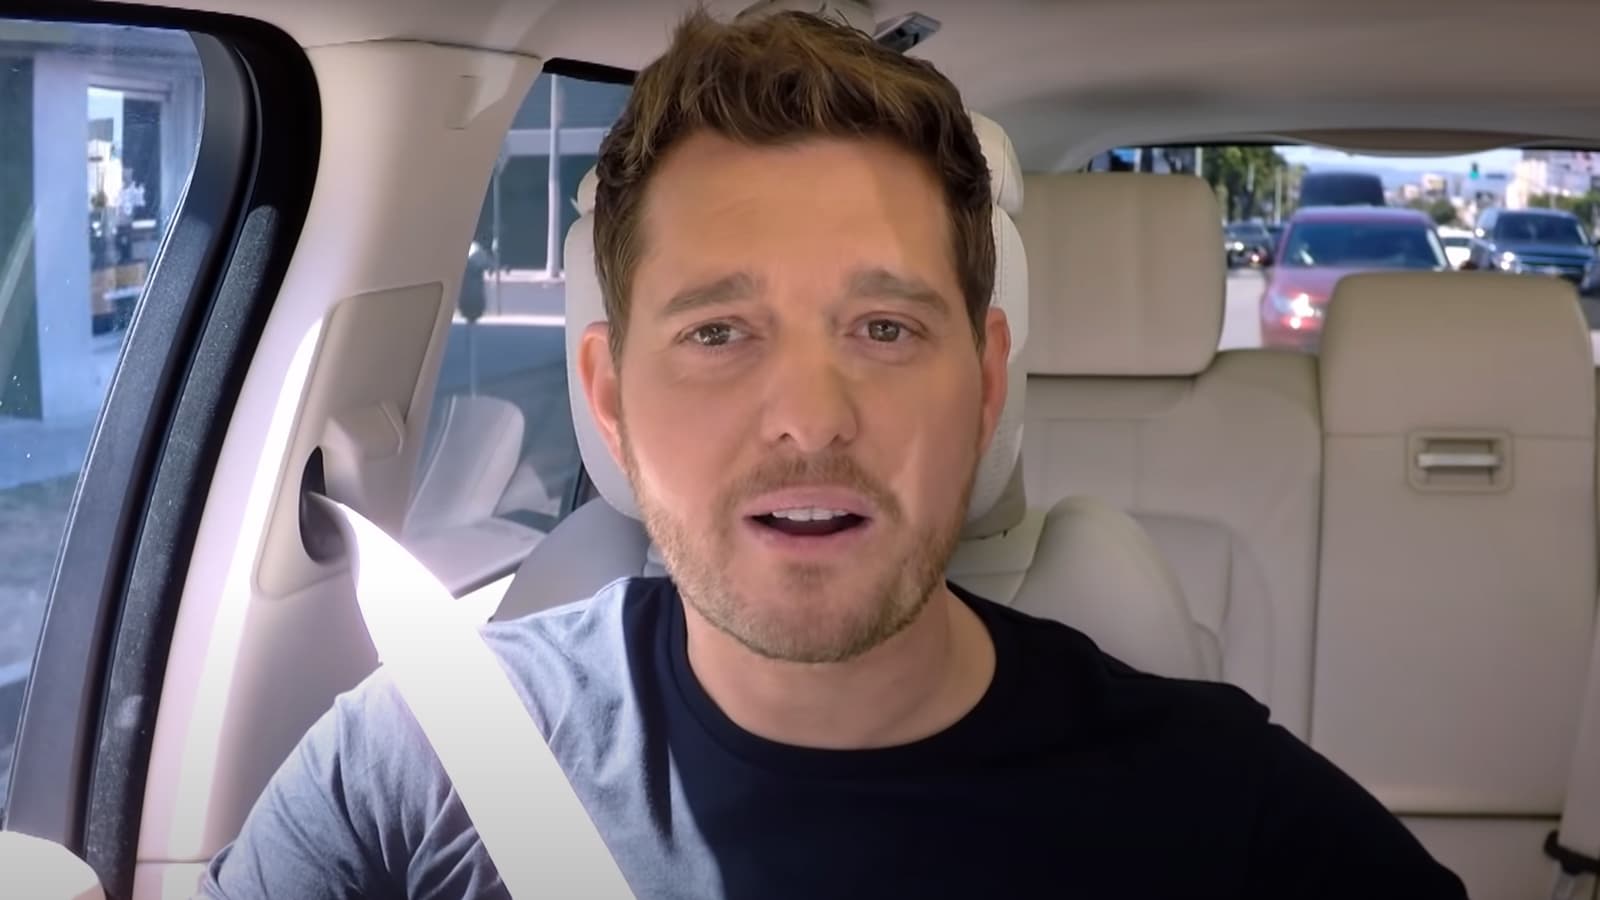 Michael Buble riding in a car